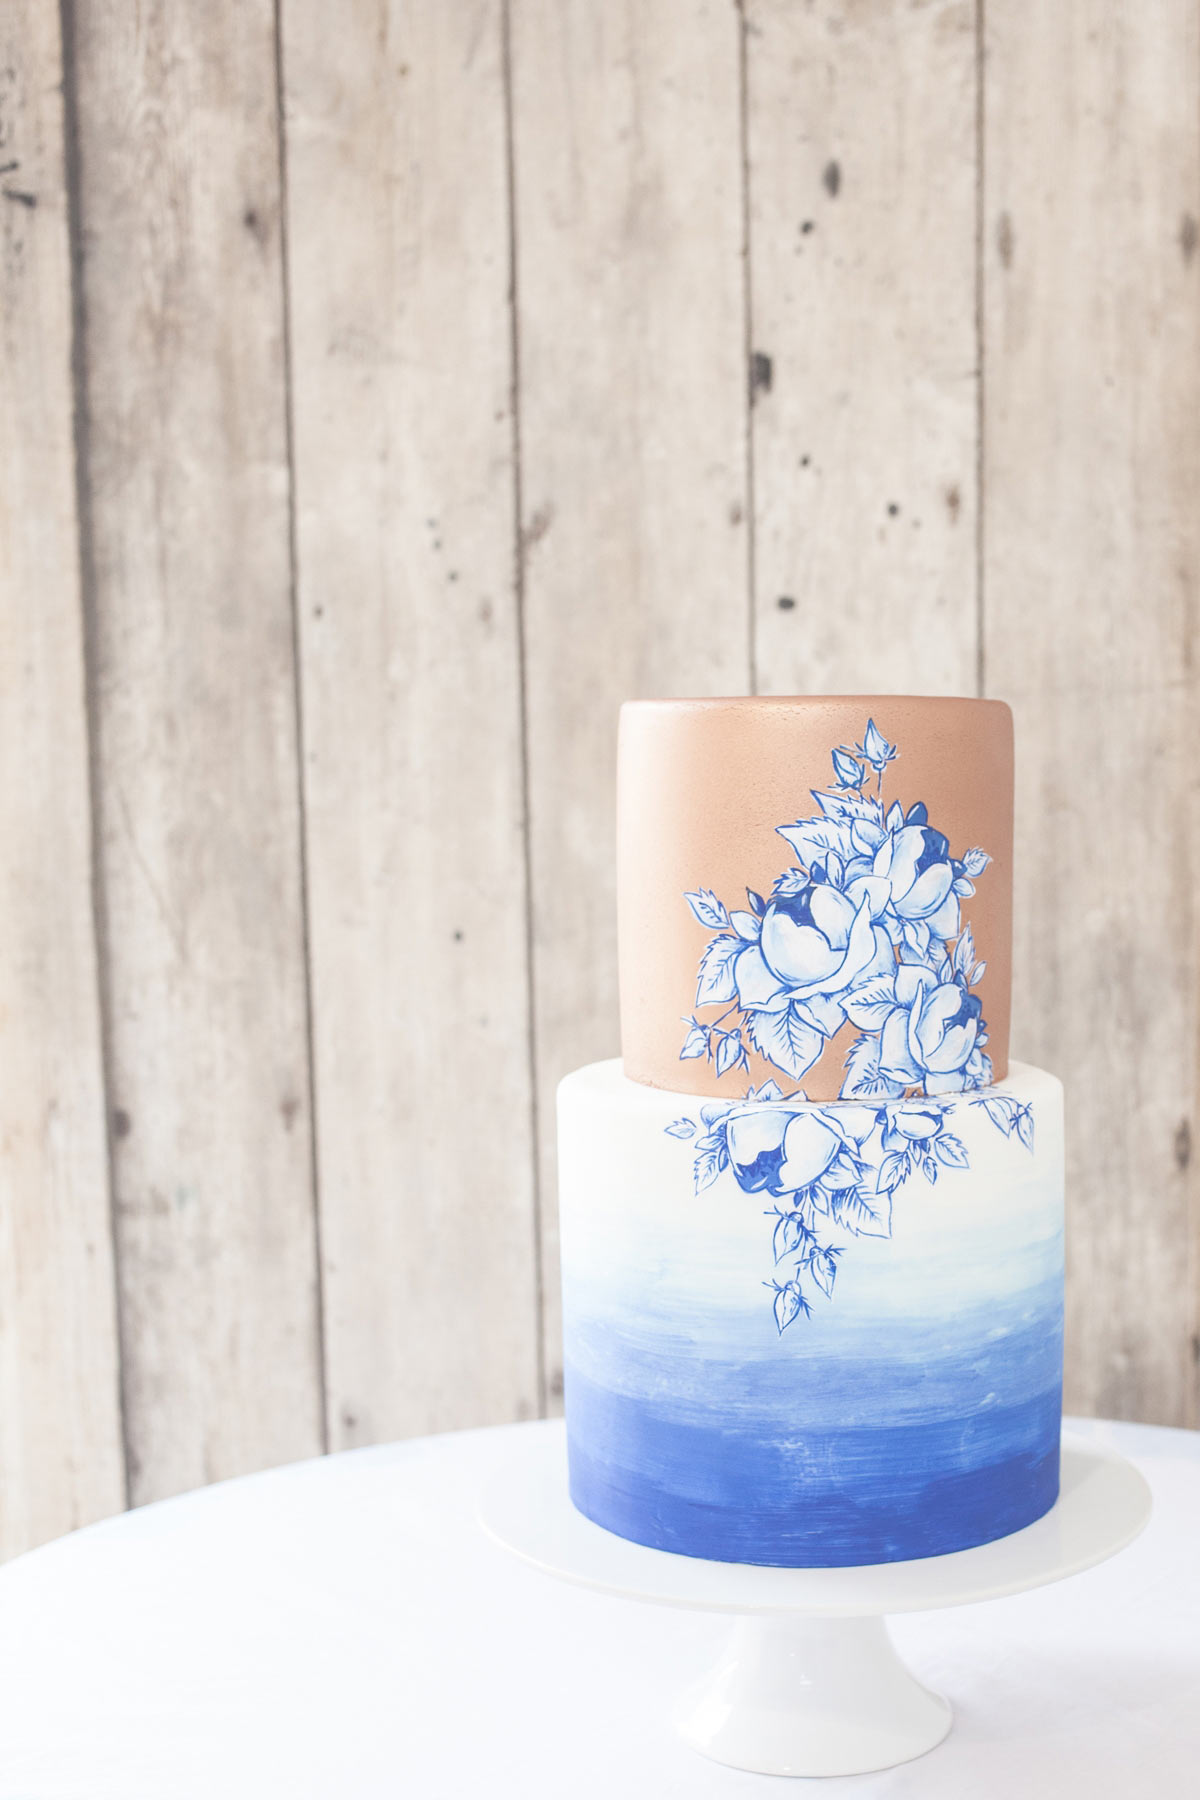 Win a wedding cake from Emily Hankins